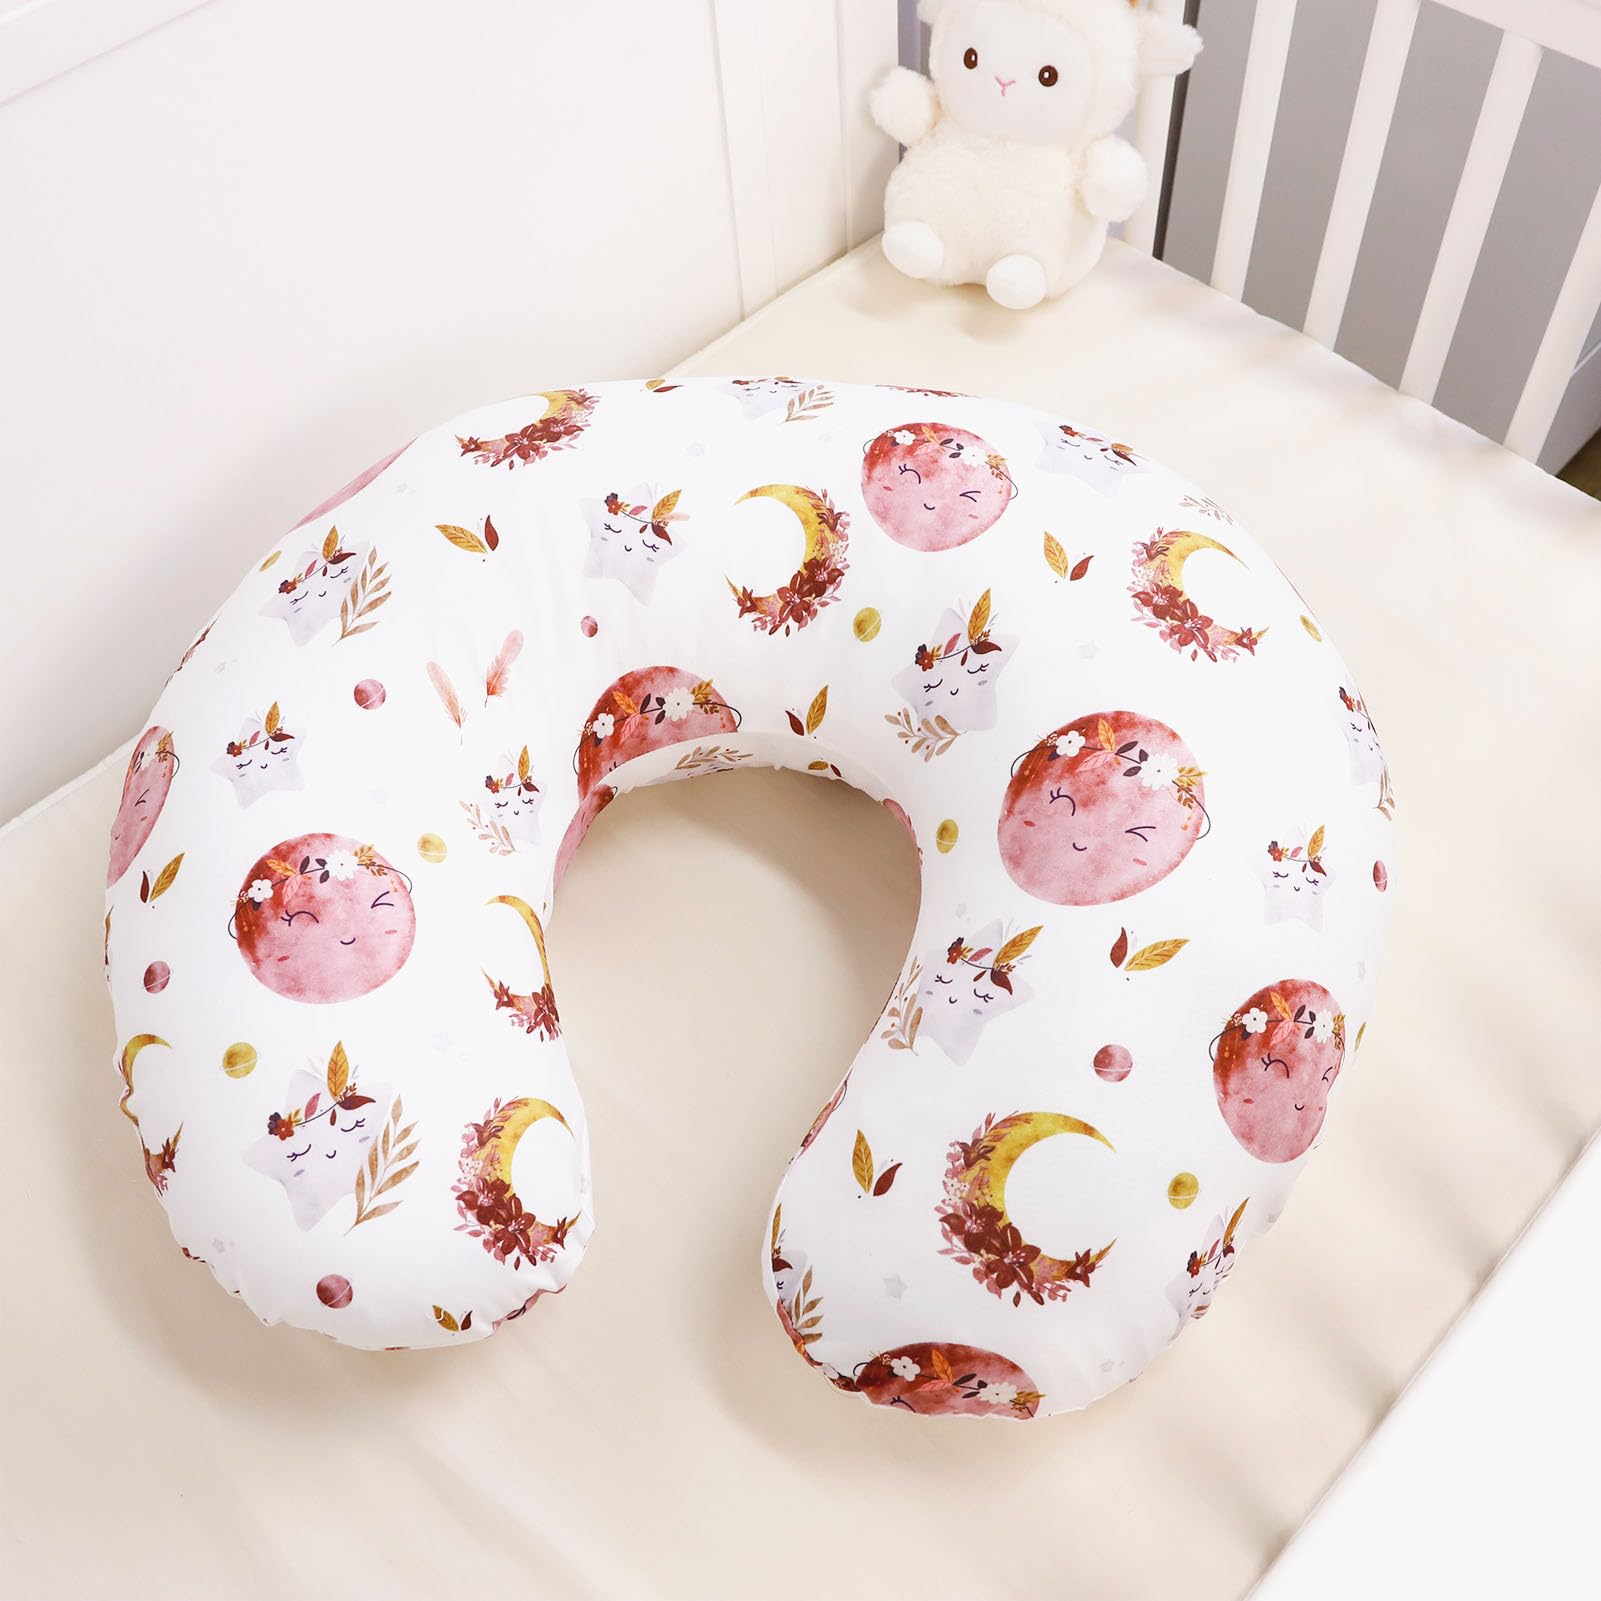 Jundetye Baby Nursing Pillow Cover, Removeable Breastfeeding Pillow Slipcover, Nursing Pillow Case for Newborn Boys Girls, Soft Fabric Fits Snug On Infant, Washable & Breathable, Moon Star